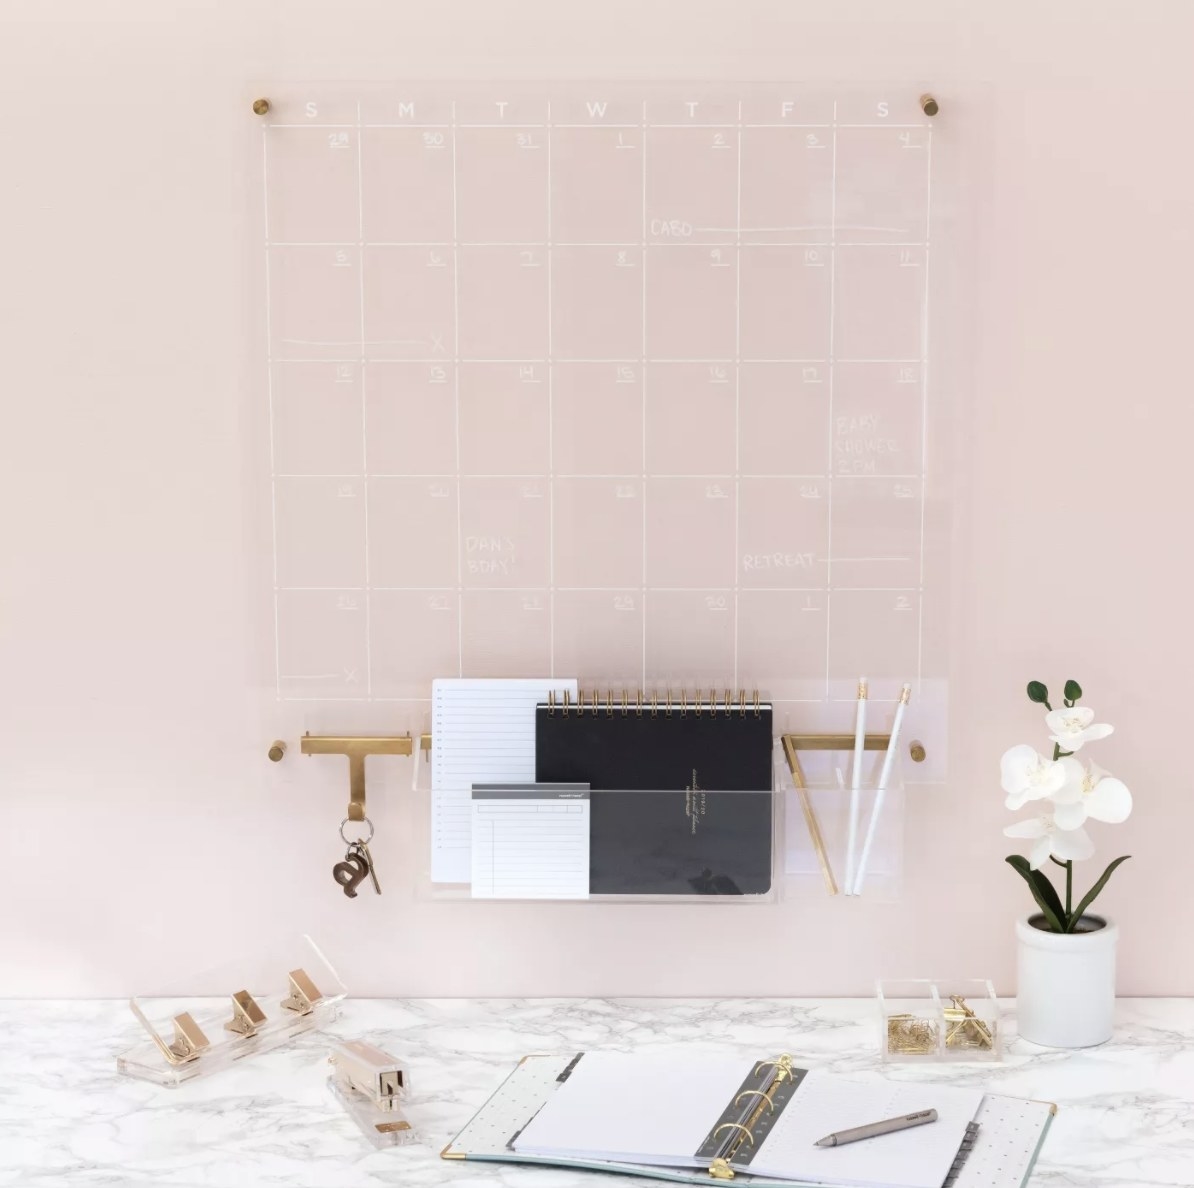 The acrylic calendar is hung on a light pink wall and surrounded by white and black decor and accessories